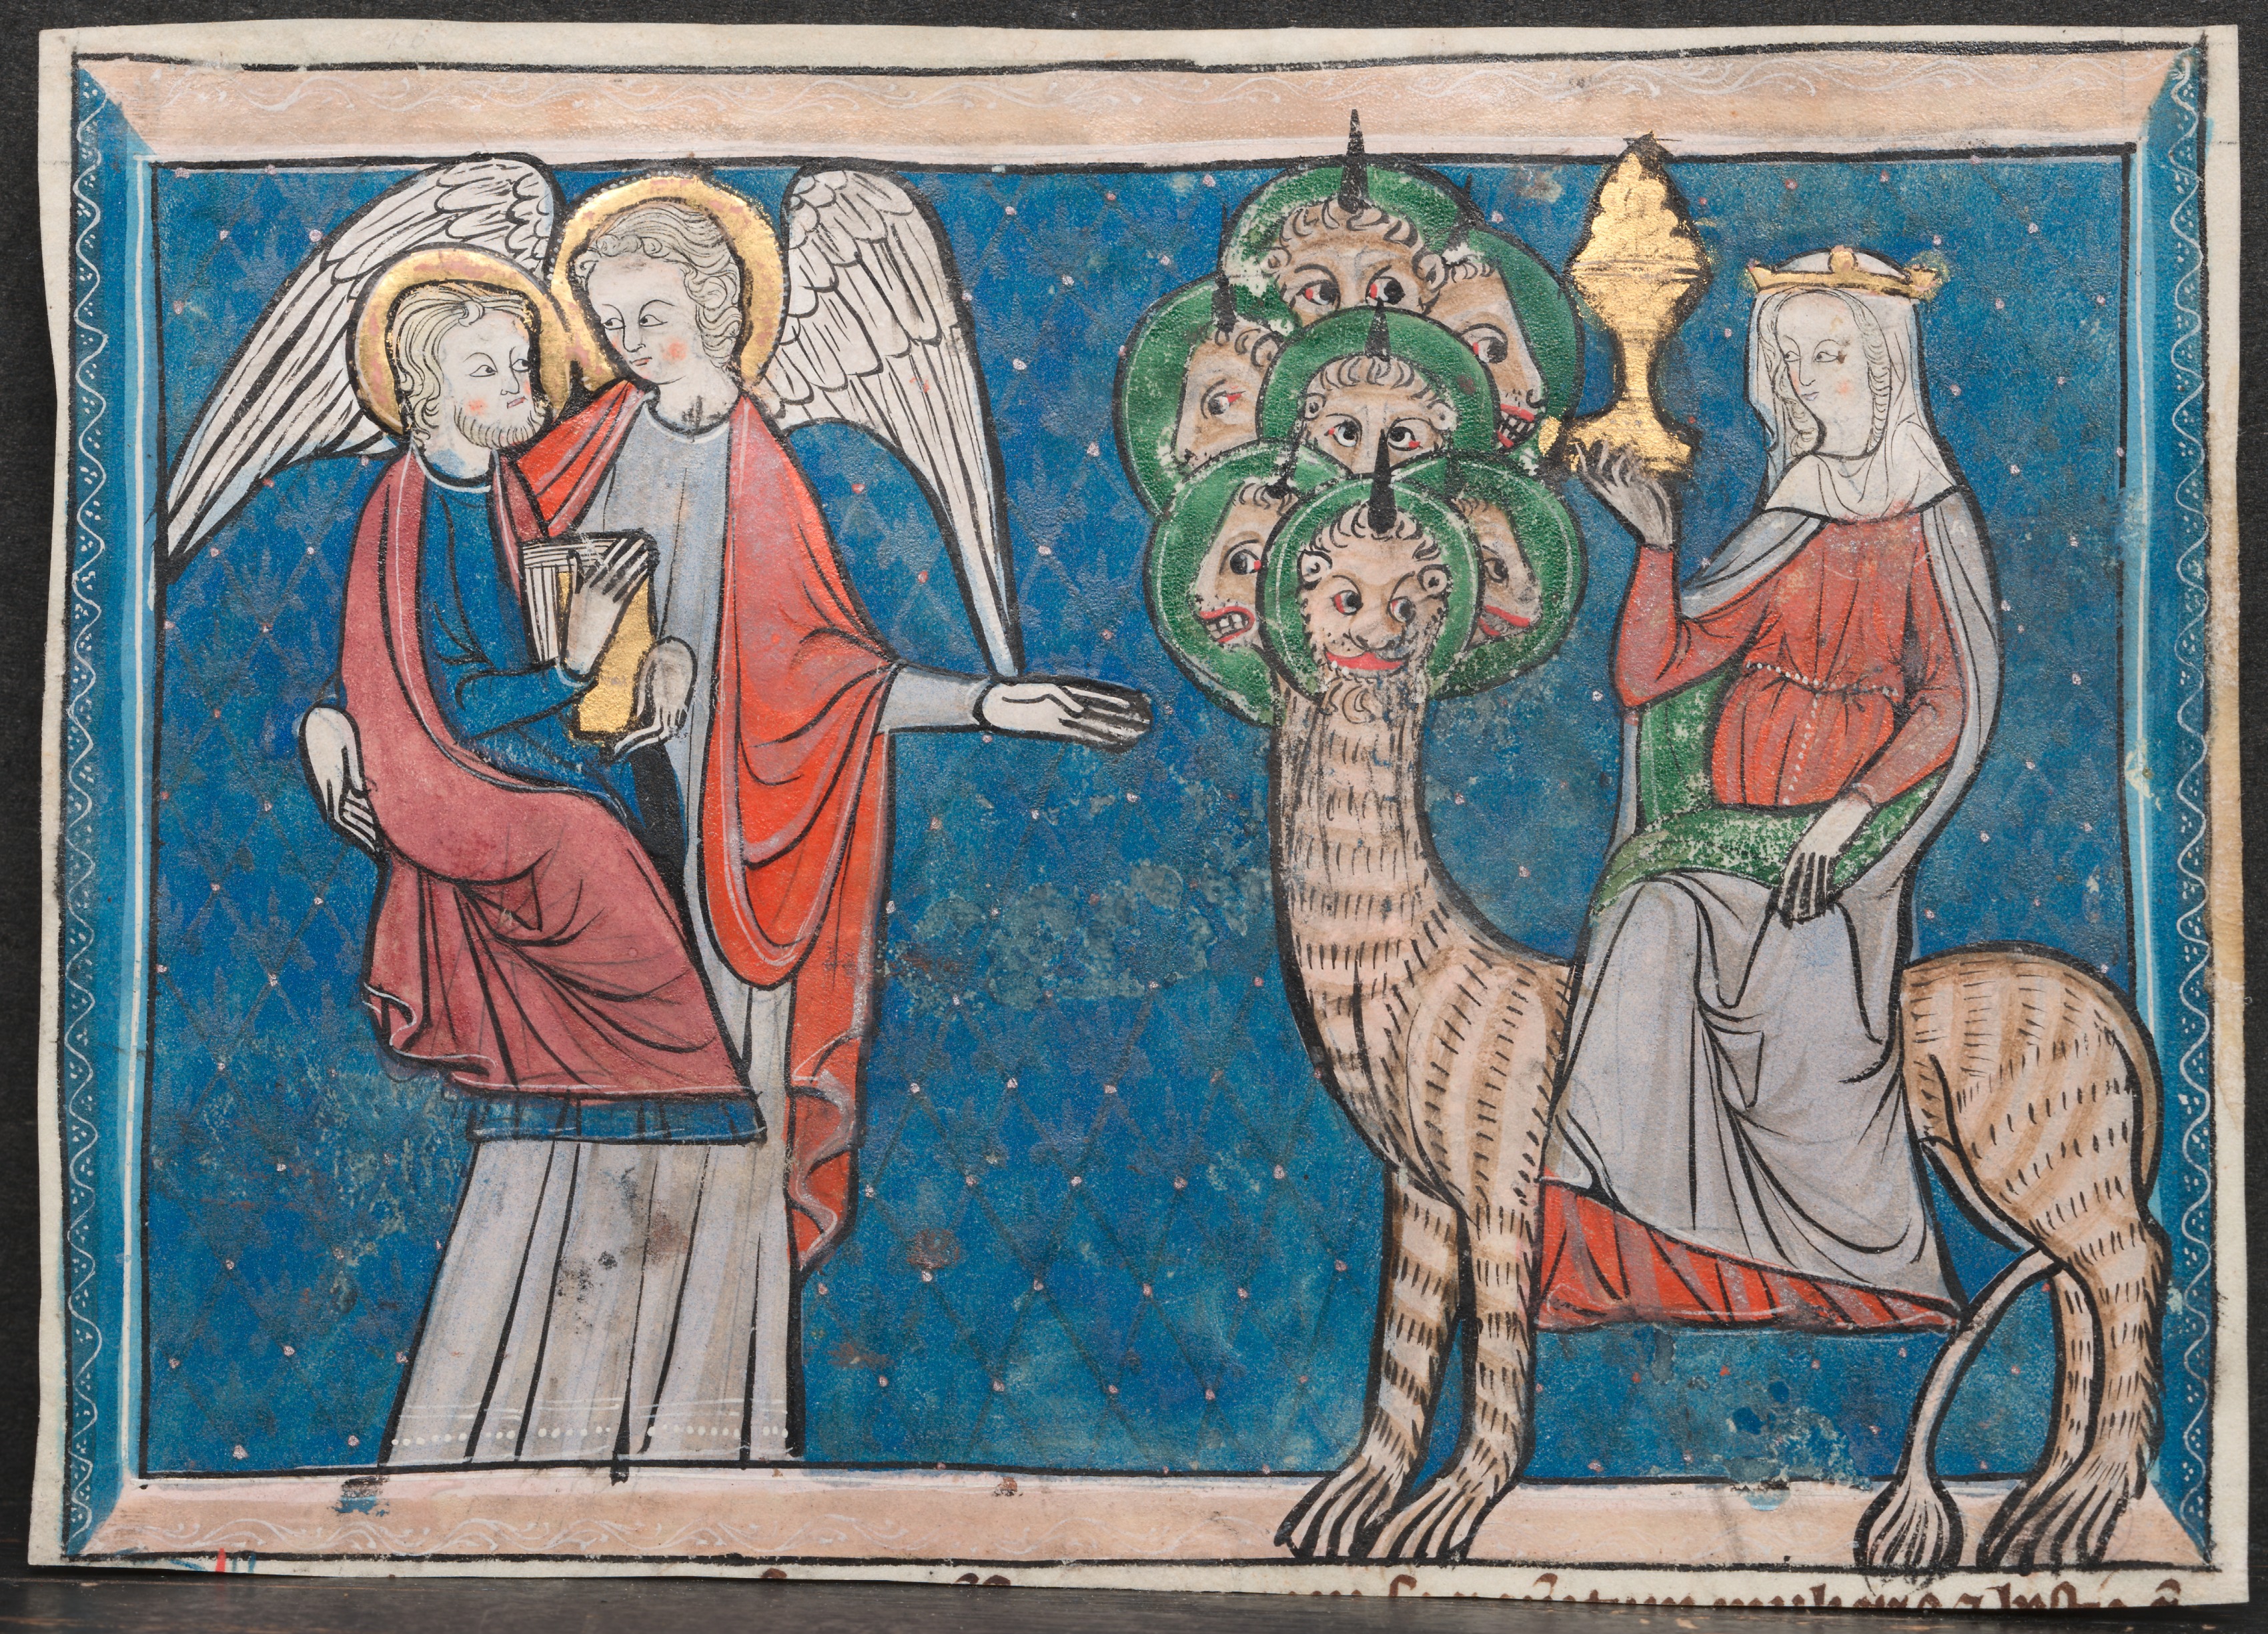 Miniatures from a Manuscript of the Apocalypse